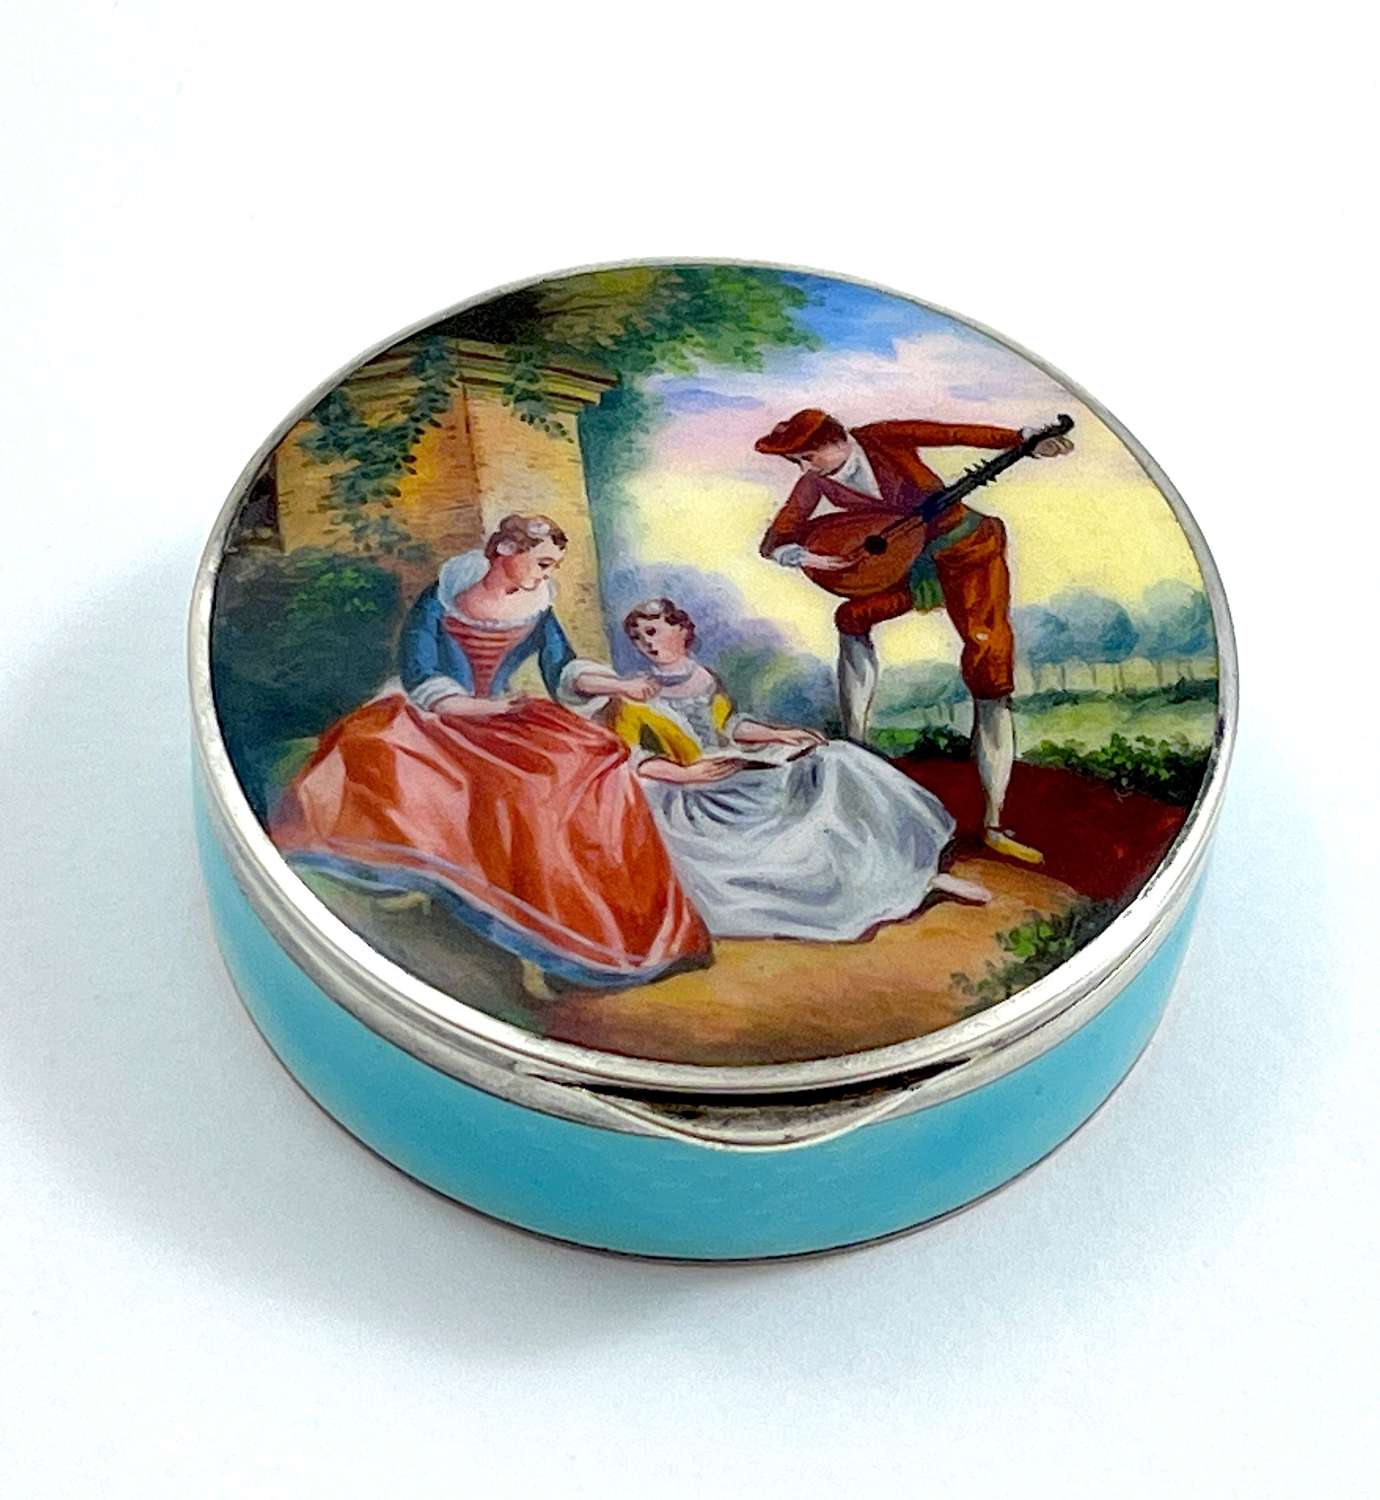 High Quality Antique Silver and Guilloche Enamel Pill Box.